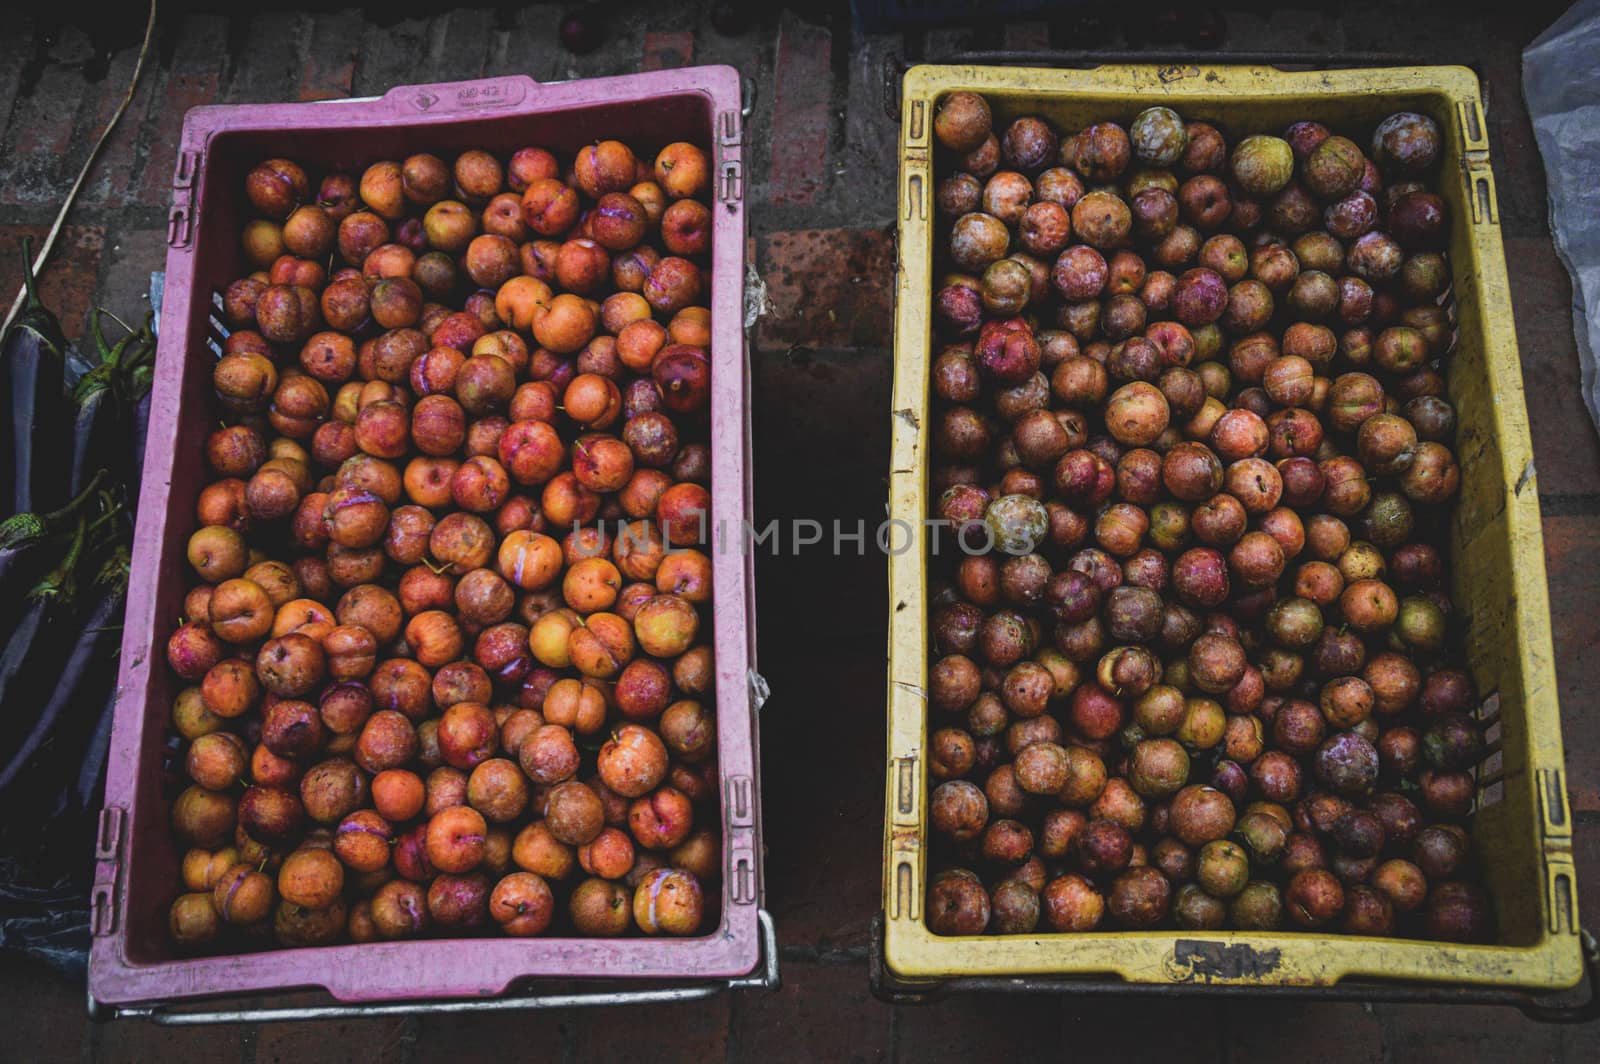 Crab apples (Malus doumeri) sold in Luang Prabang Morning Market in Laos that shows the life, culture and livelihood of the local people